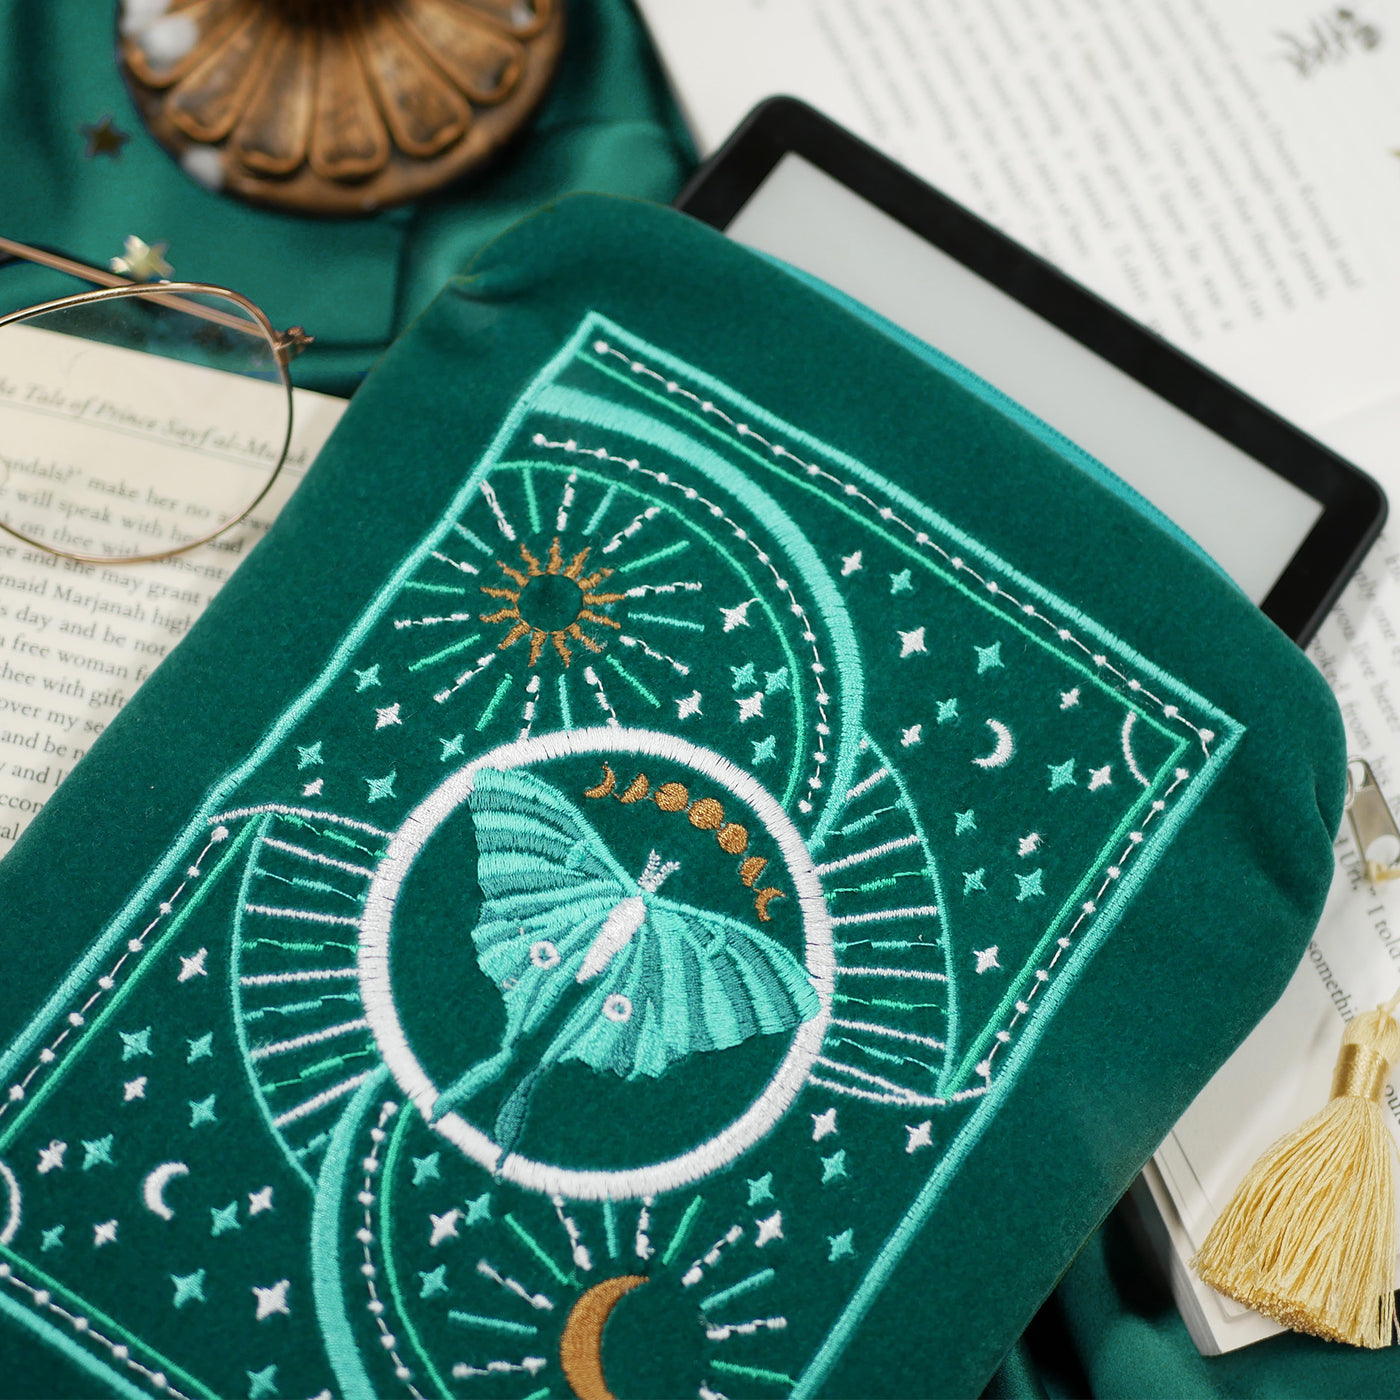 Luna Moth - Kindle & E-reader Sleeve - The Quirky Cup Collective 